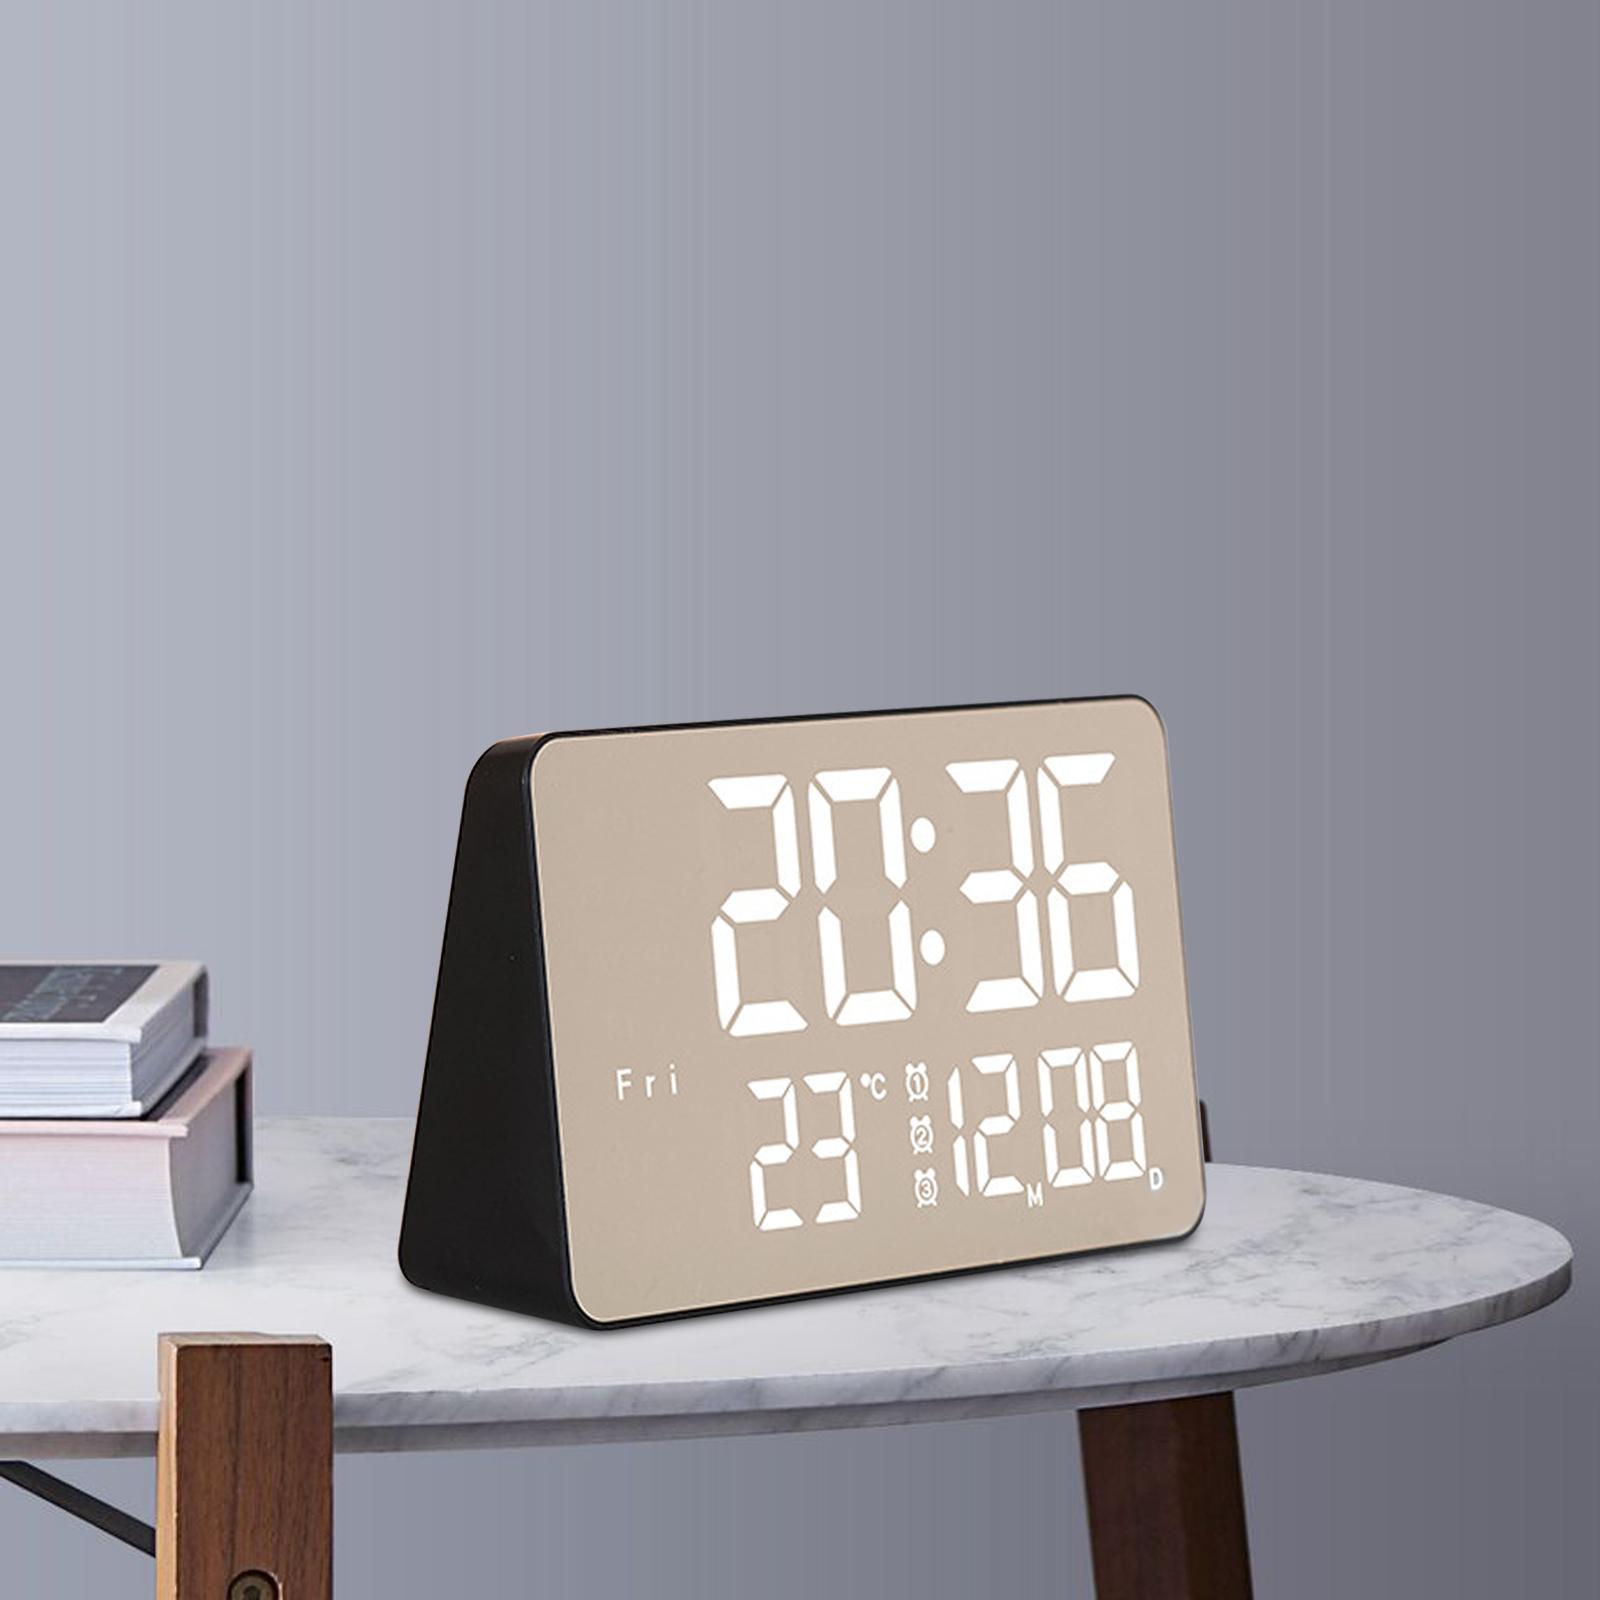 12/24H Alarm Clock LED Screen USB Snooze Function Tabletop Bedroom Mirrored